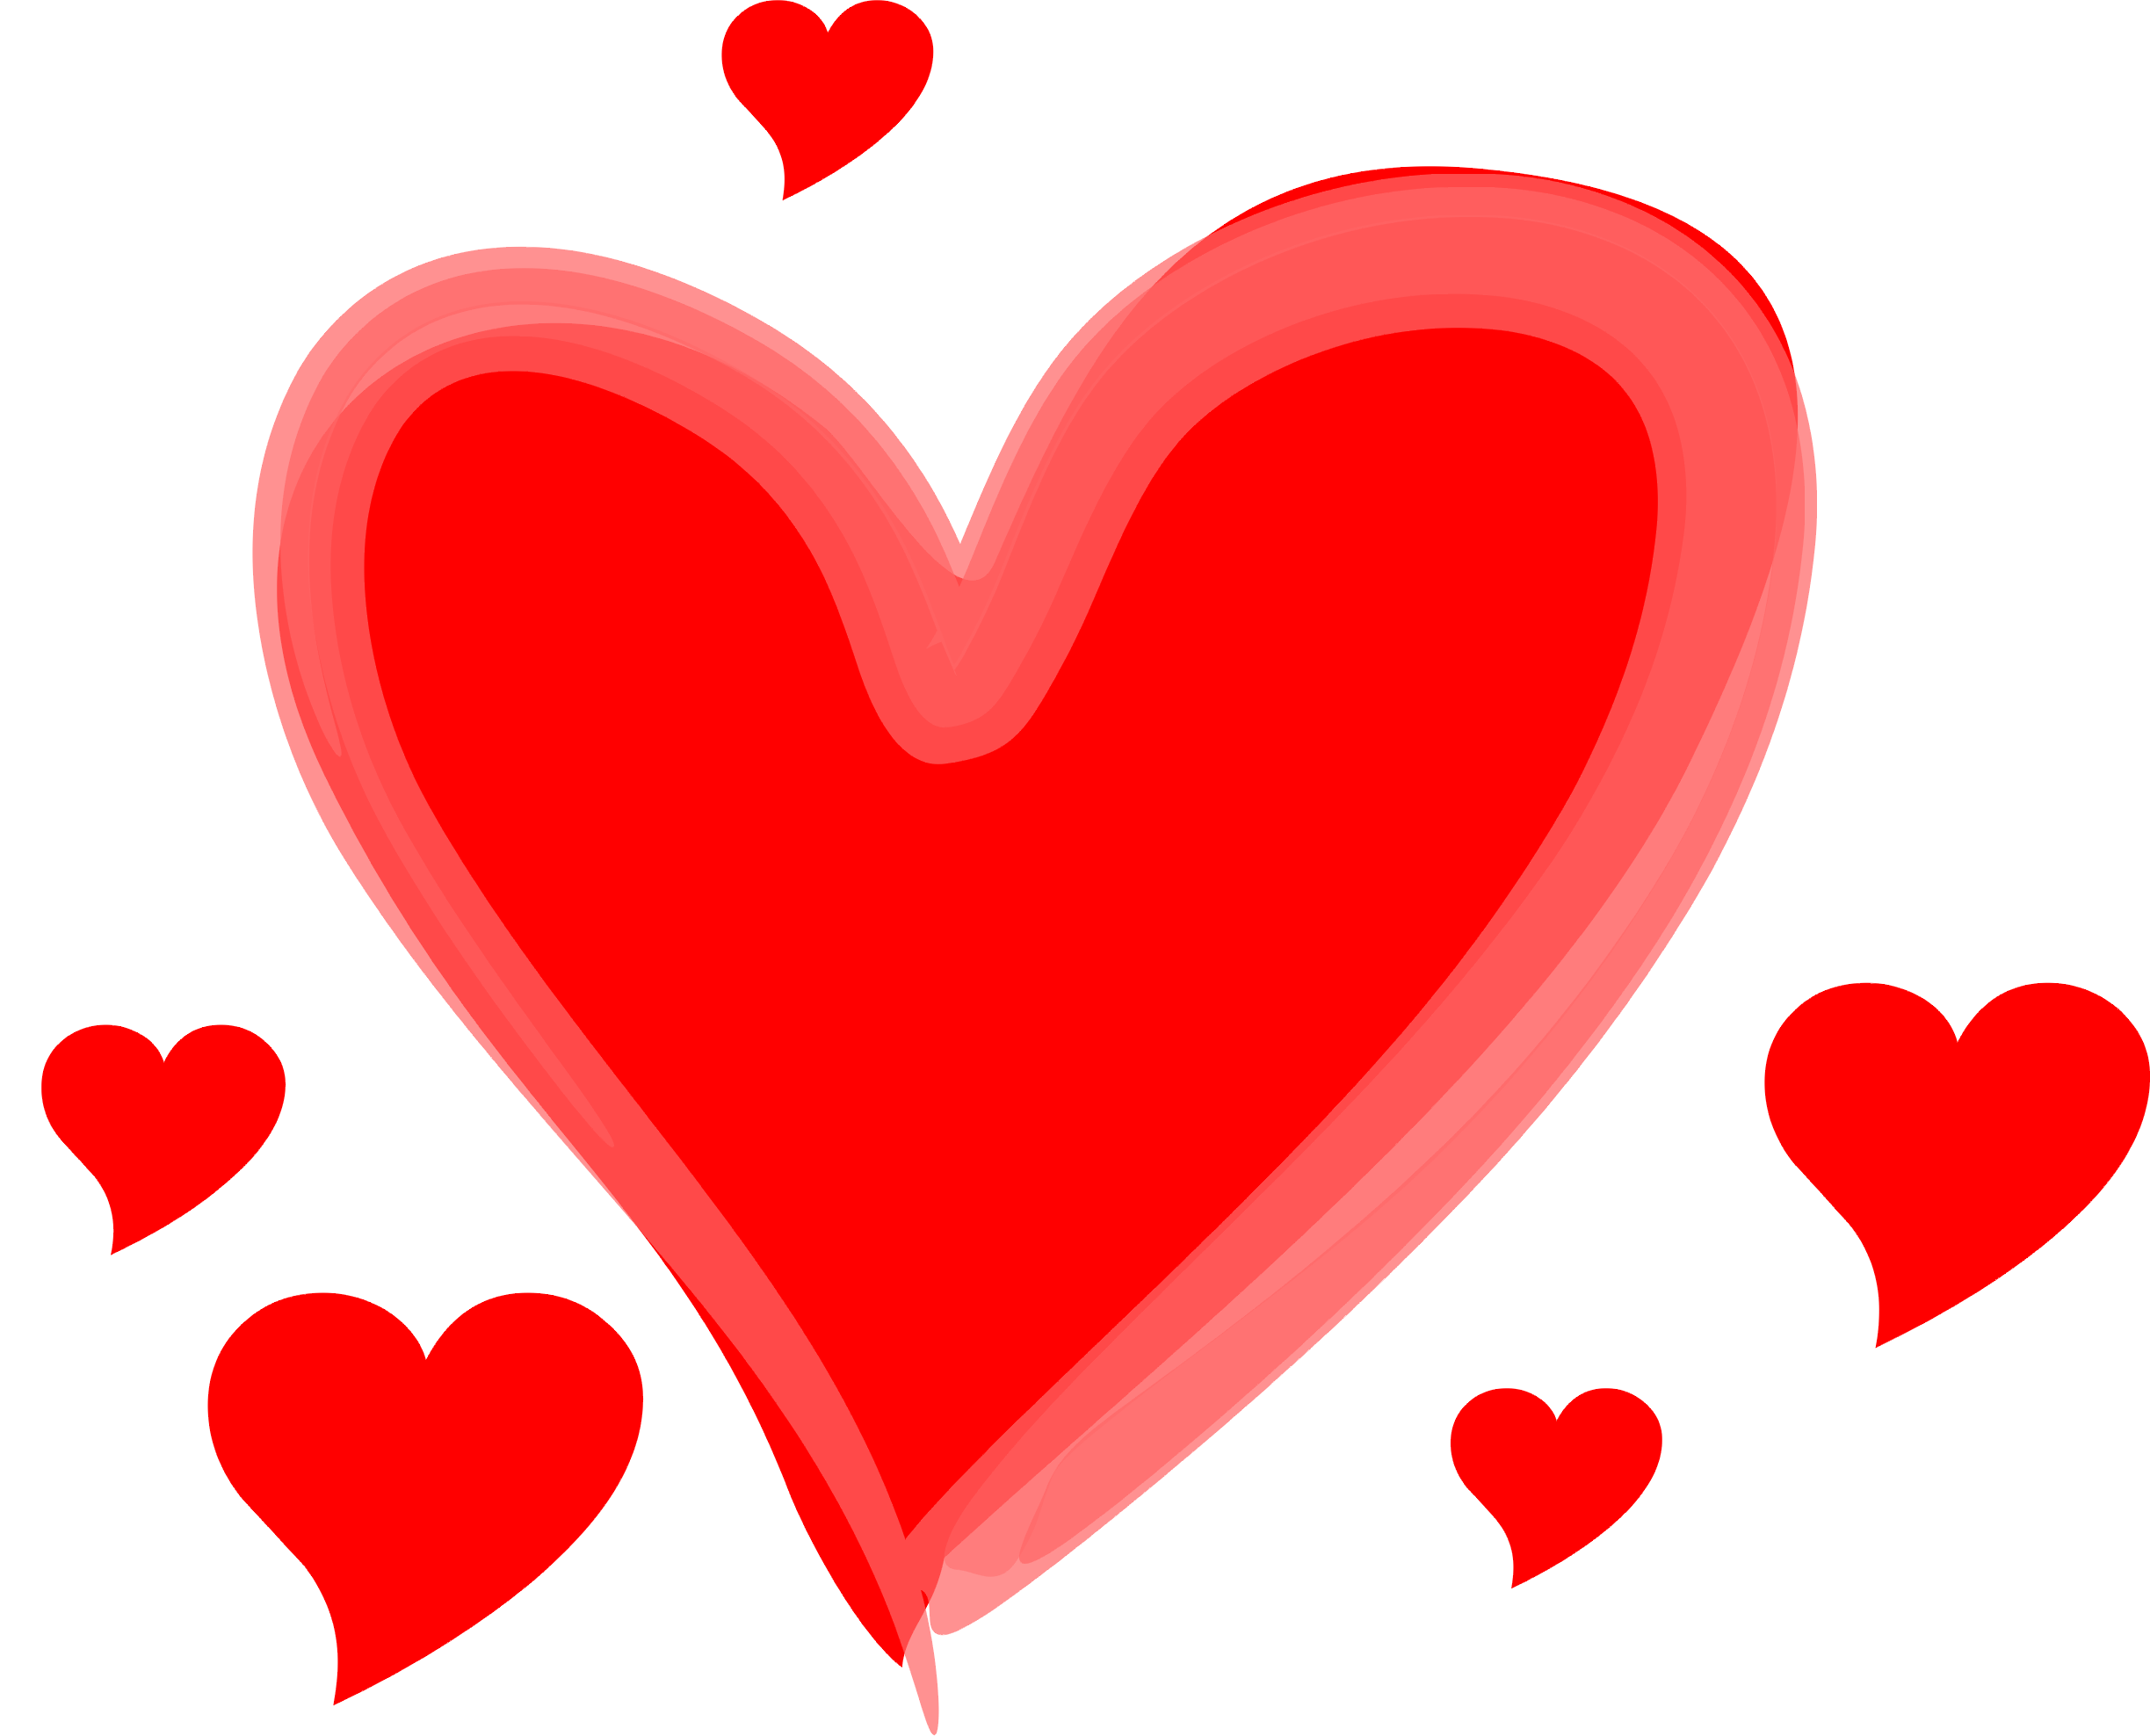 Love Heart Images Collection (37+)